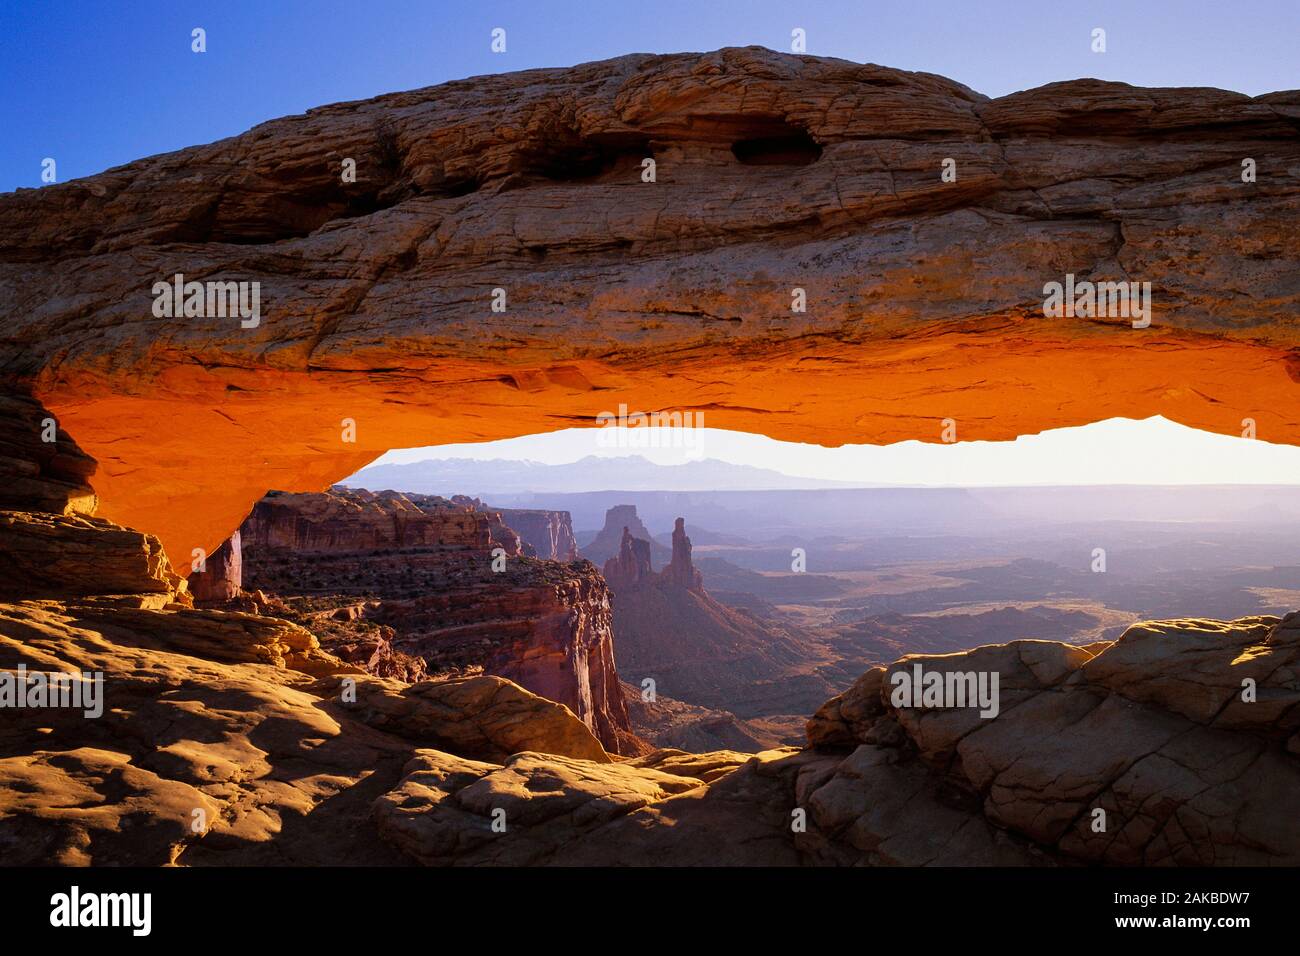 Landscape with natural sandstone arch in desert, Mesa Arch, Canyonlands National Park, Utah, USA Stock Photo